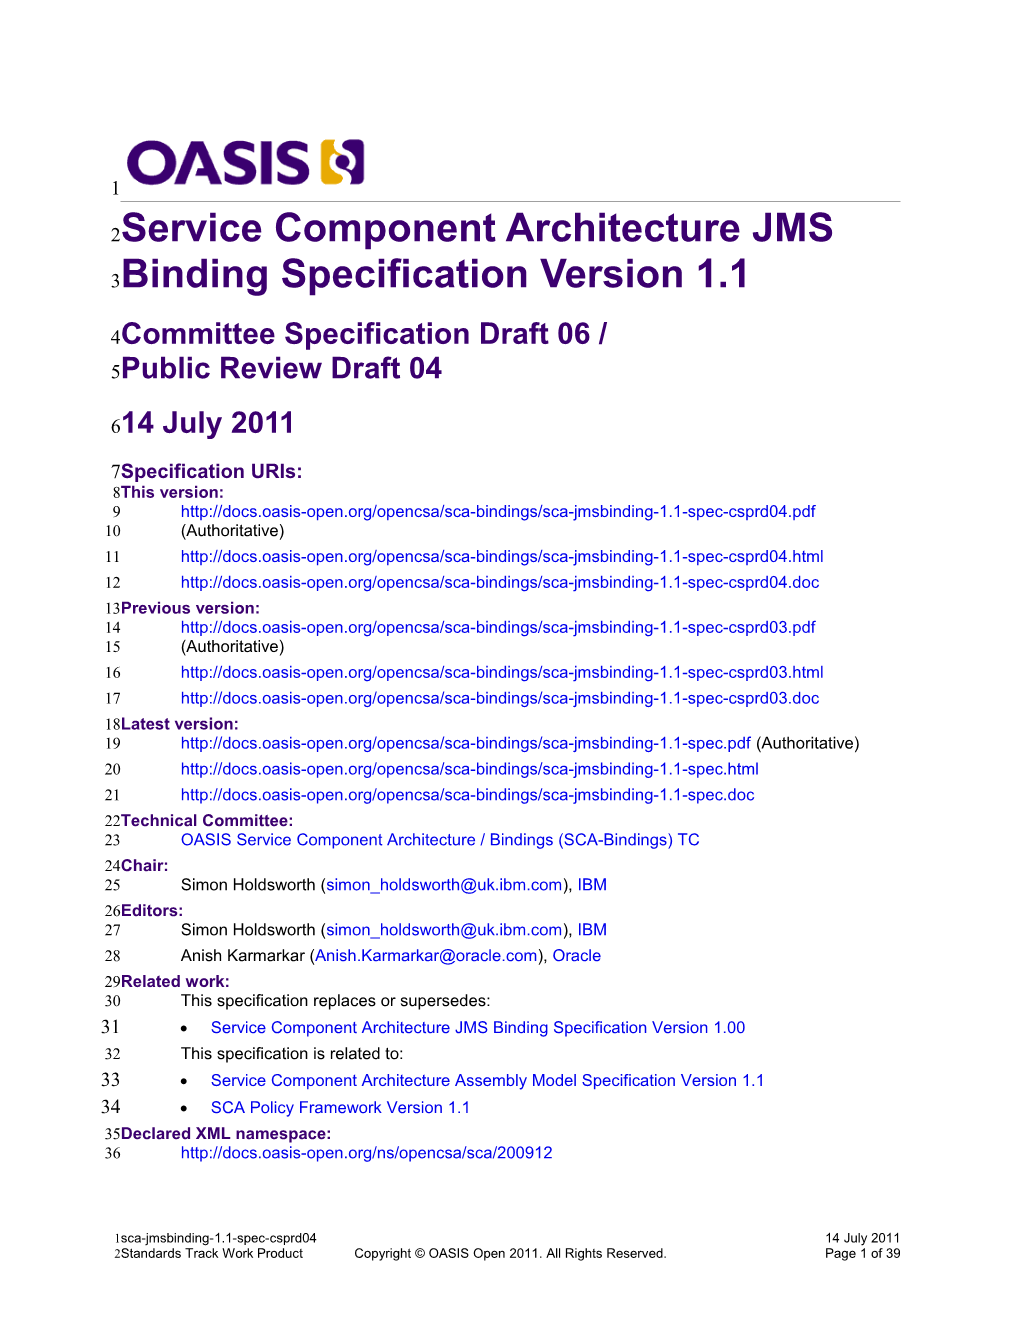 Service Component Architecture JMS Binding Specification Version 1.1